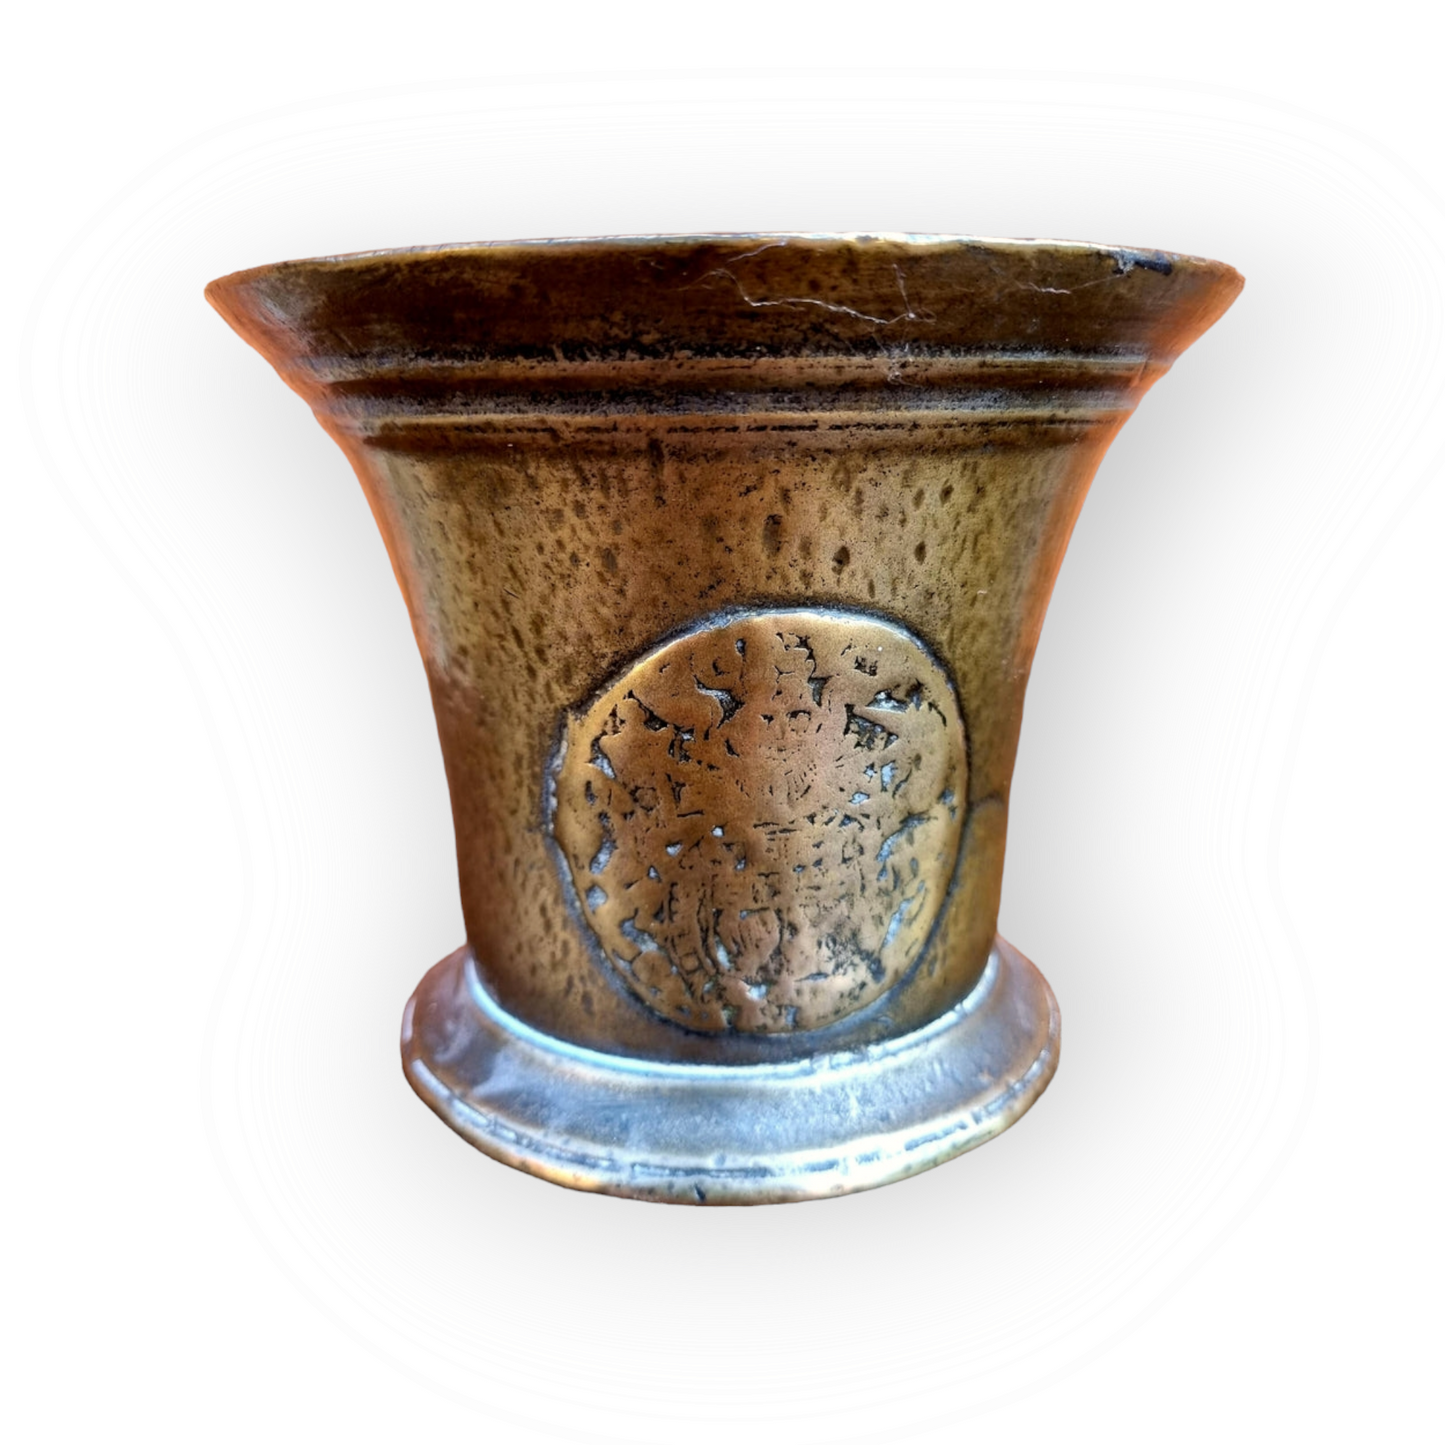 Early 17th Century English Antique Bronze Mortar, by Abraham Rudhall (1684-1718), of Gloucestershire